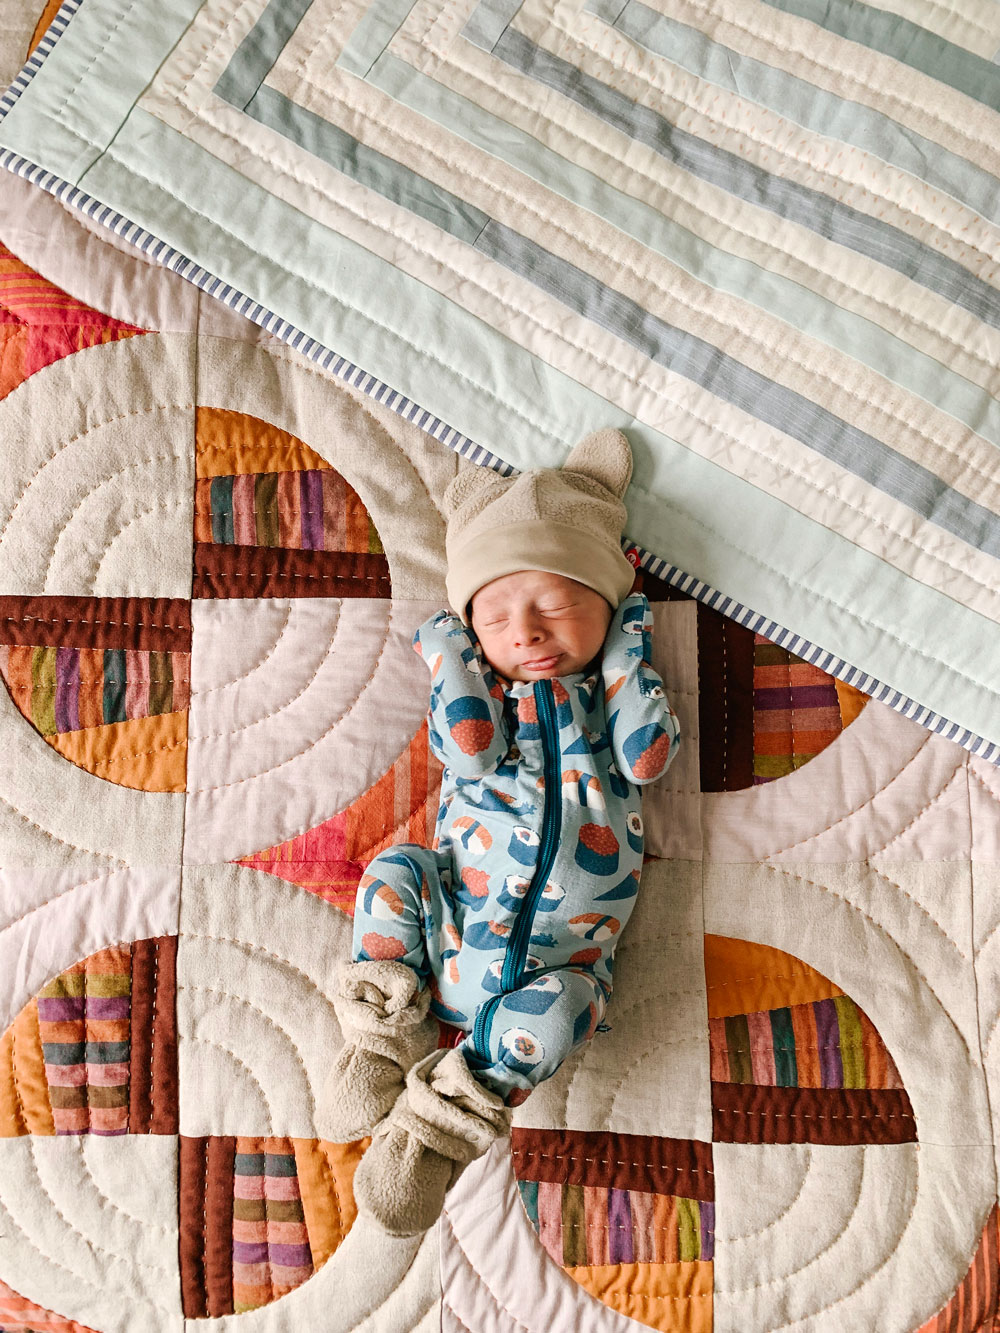 The 10 newborn baby essentials every first time mom should put on their baby registry